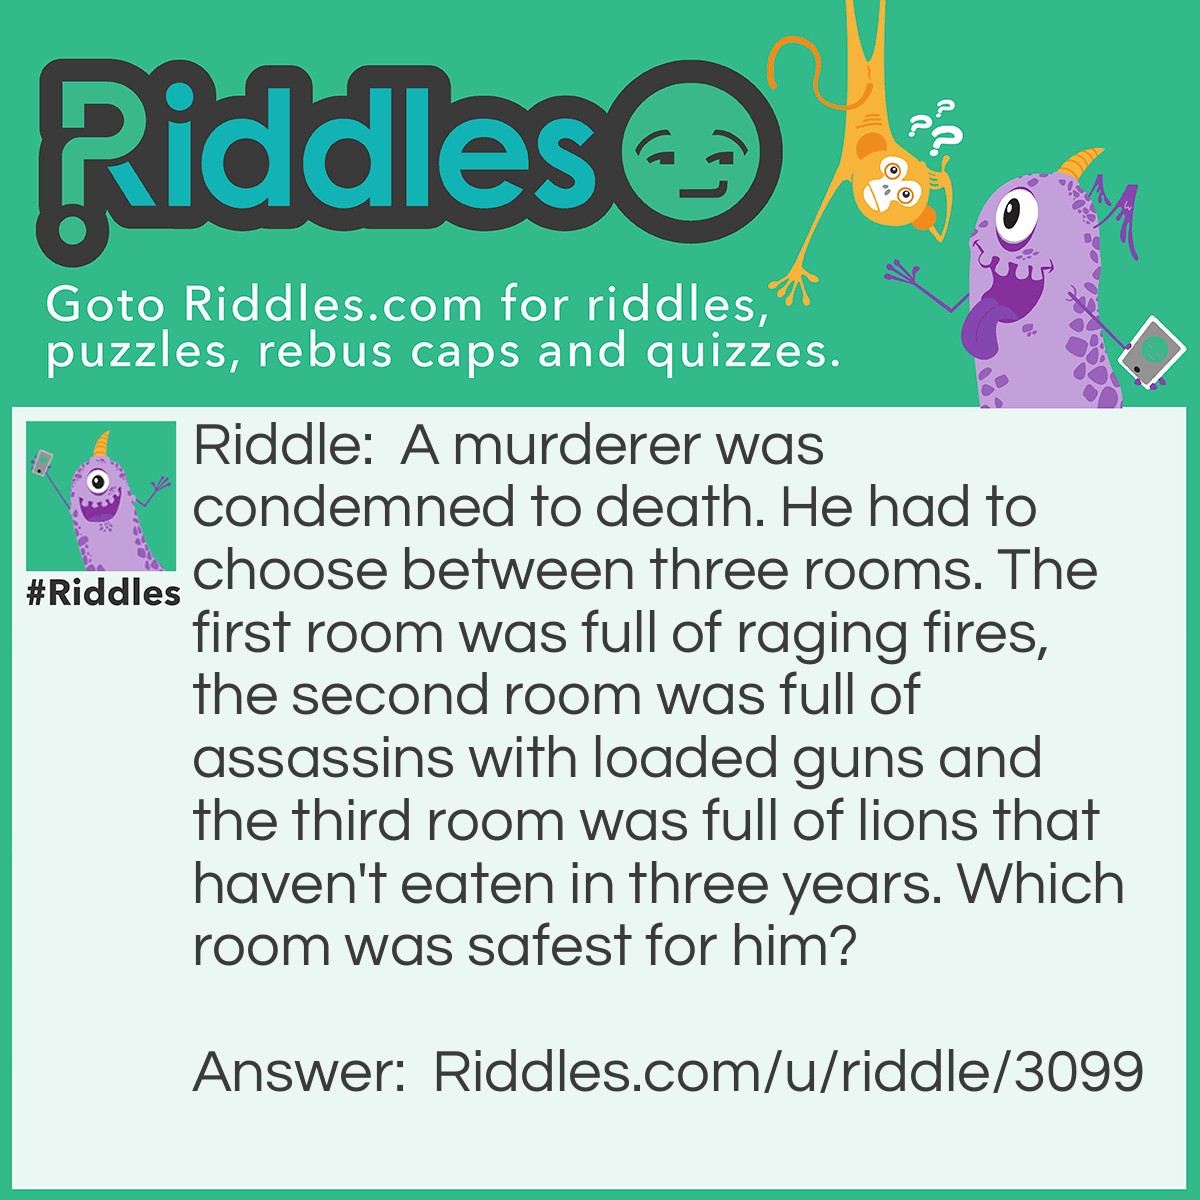 Riddle: A murderer was condemned to death. He had to choose between three rooms. The first room was full of raging fires,the second room was full of assassins with loaded guns and the third room was full of lions that haven't eaten in three years. Which room was safest for him? Answer: The third room. Lions that haven't eaten in three years are dead.